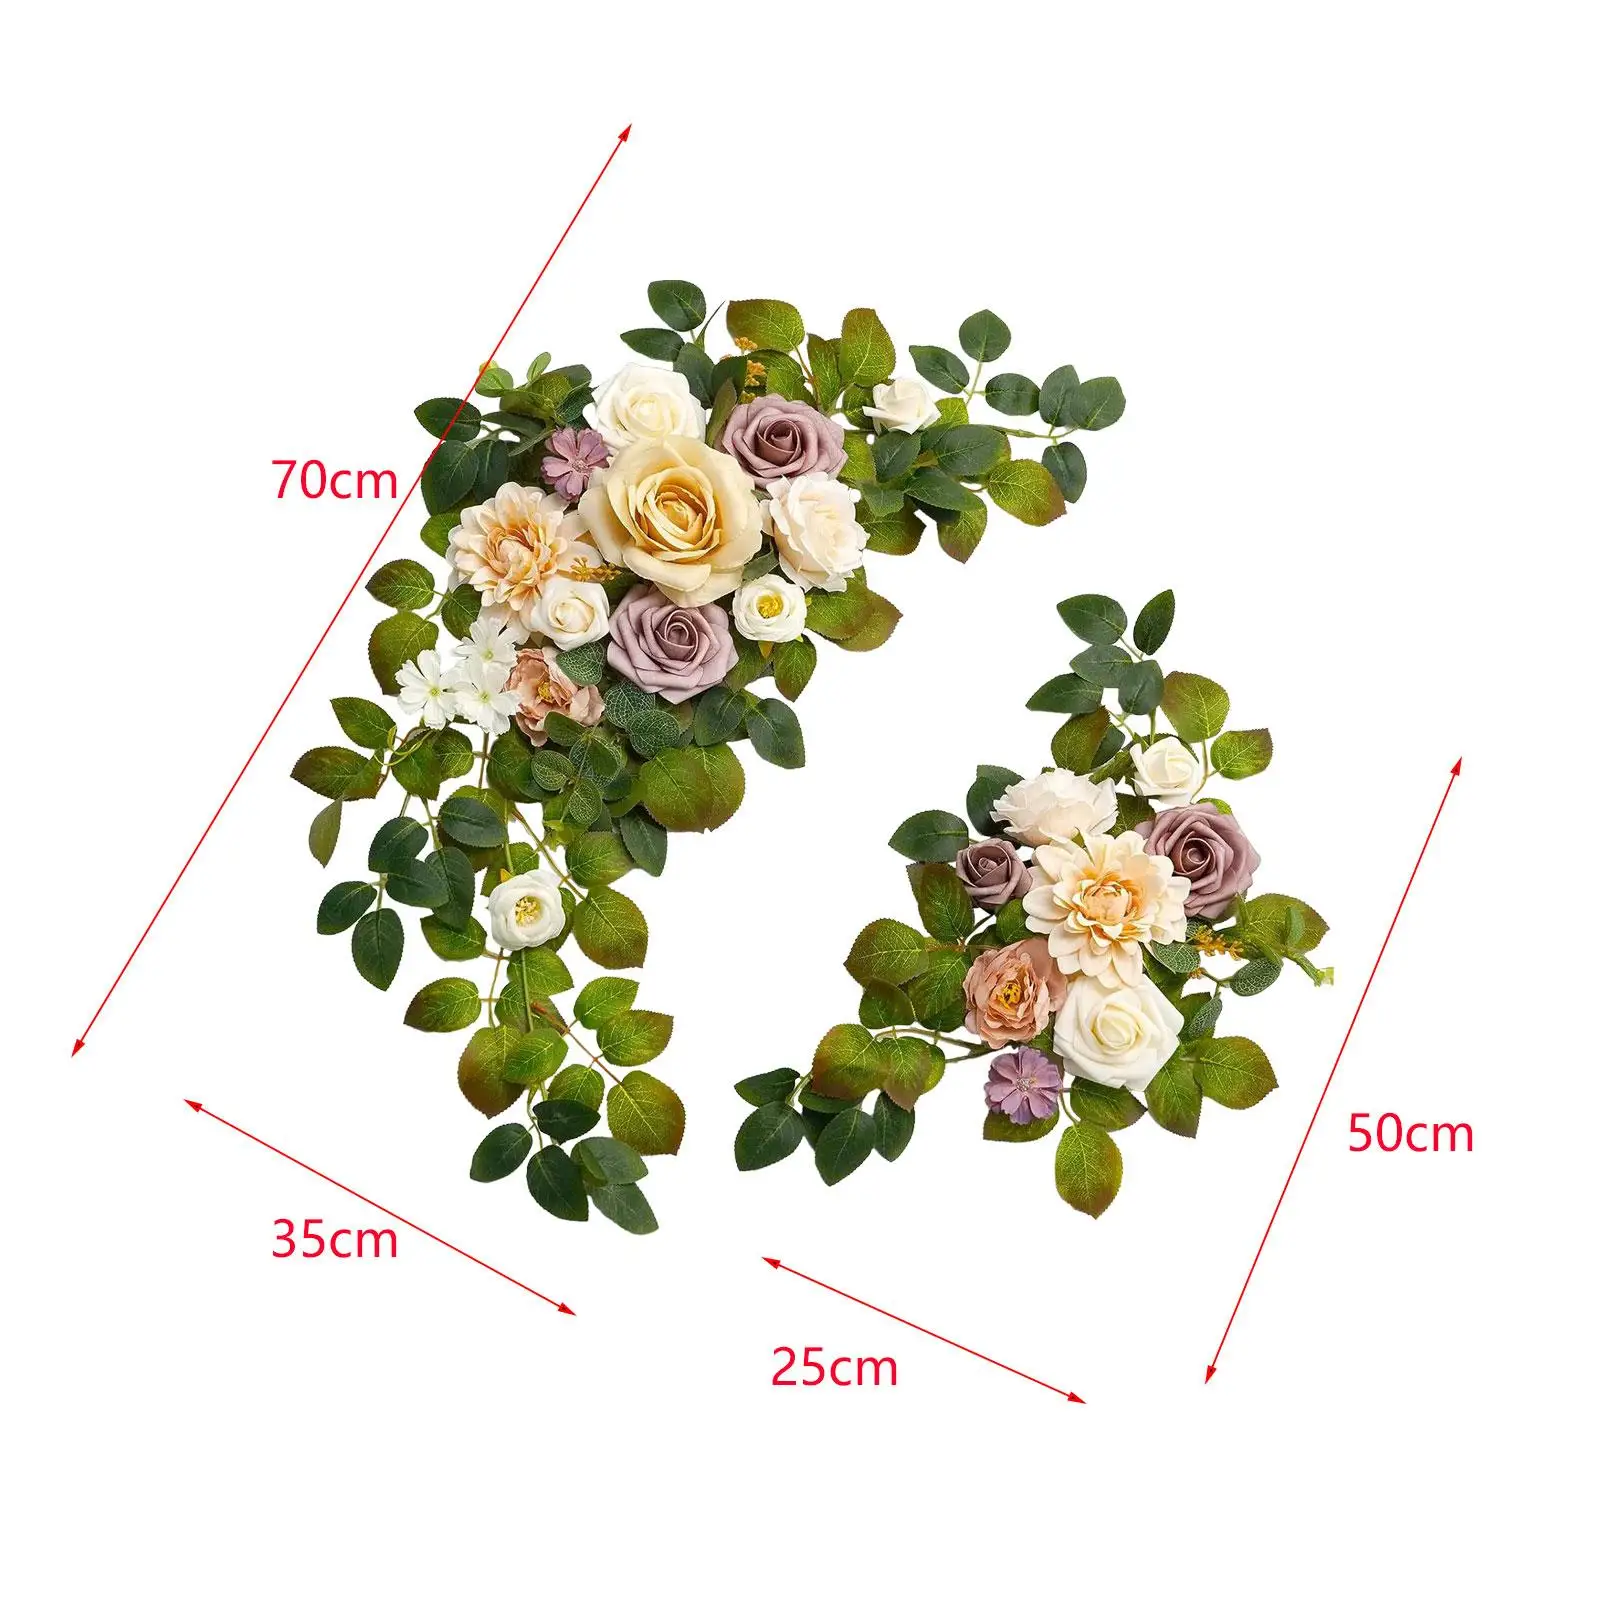 2x Wedding Arch Flowers Garland Wedding Arch Artificial Flower Arrangements for Wedding Background Backdrop Ceremony Home Party